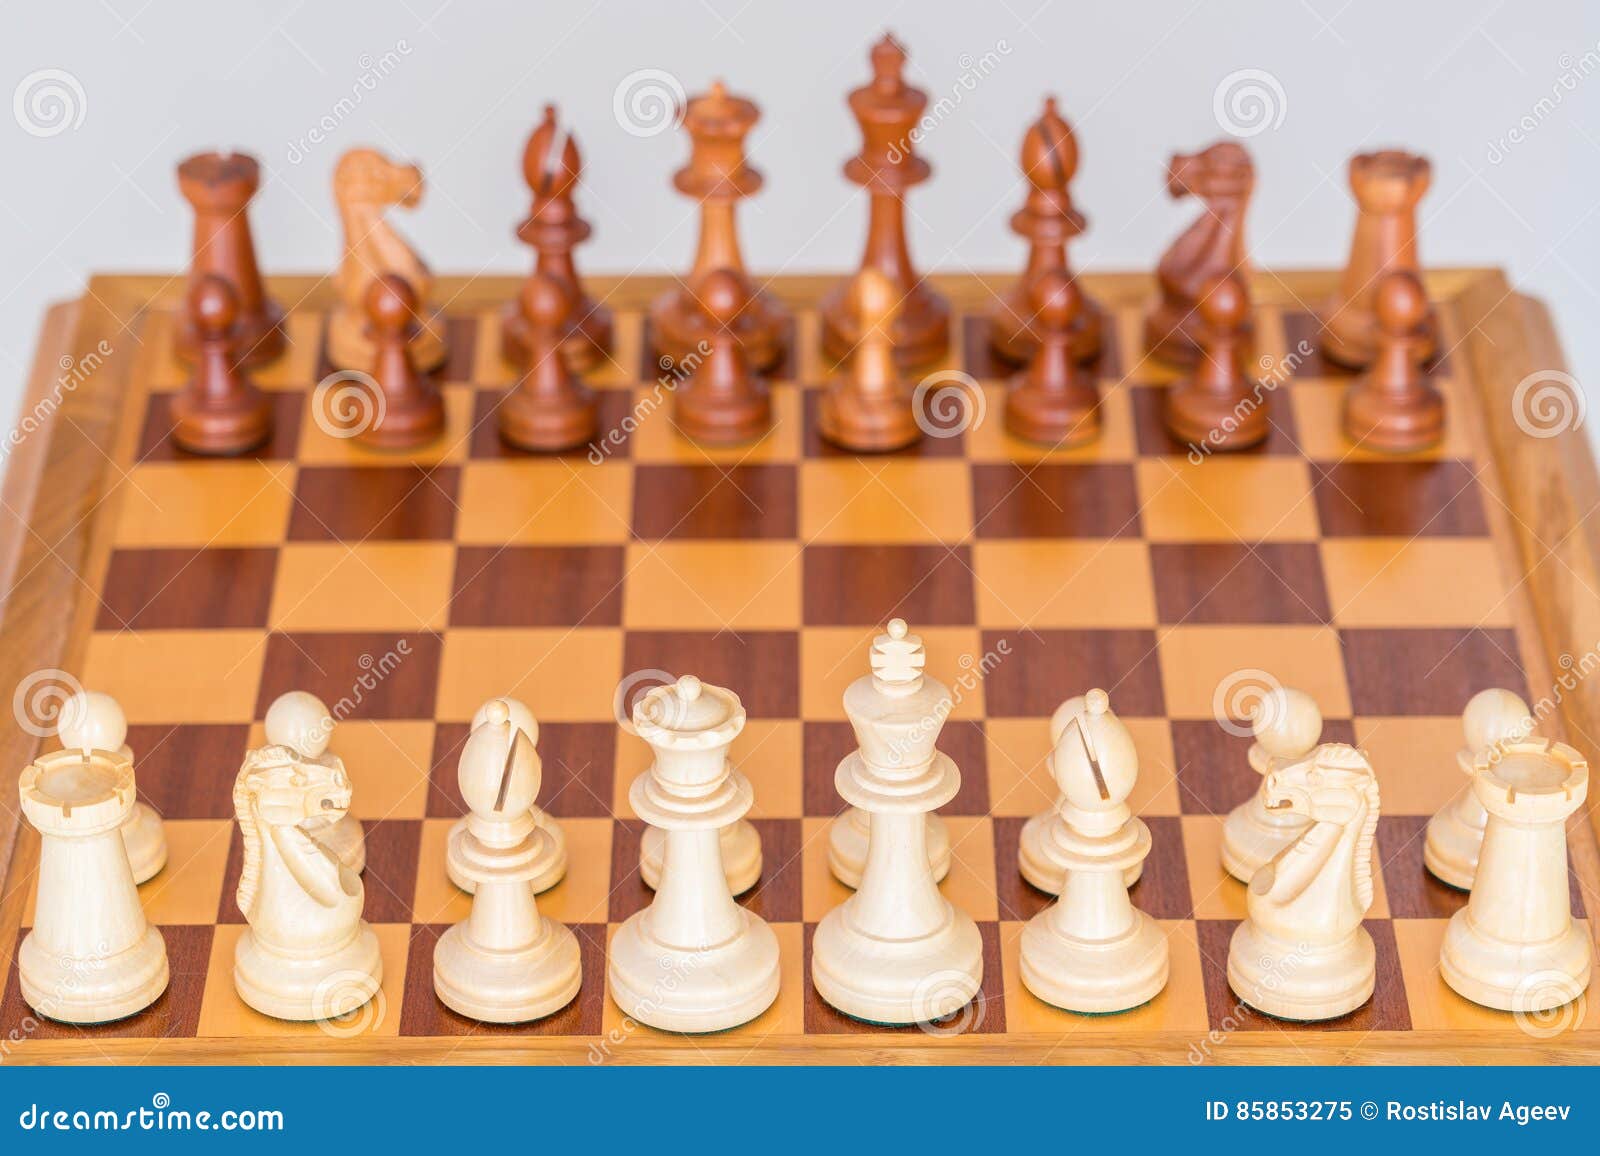 Chess Pieces in Starting Position on a Wooden Board Stock Image - Image of  challenge, check: 85853275